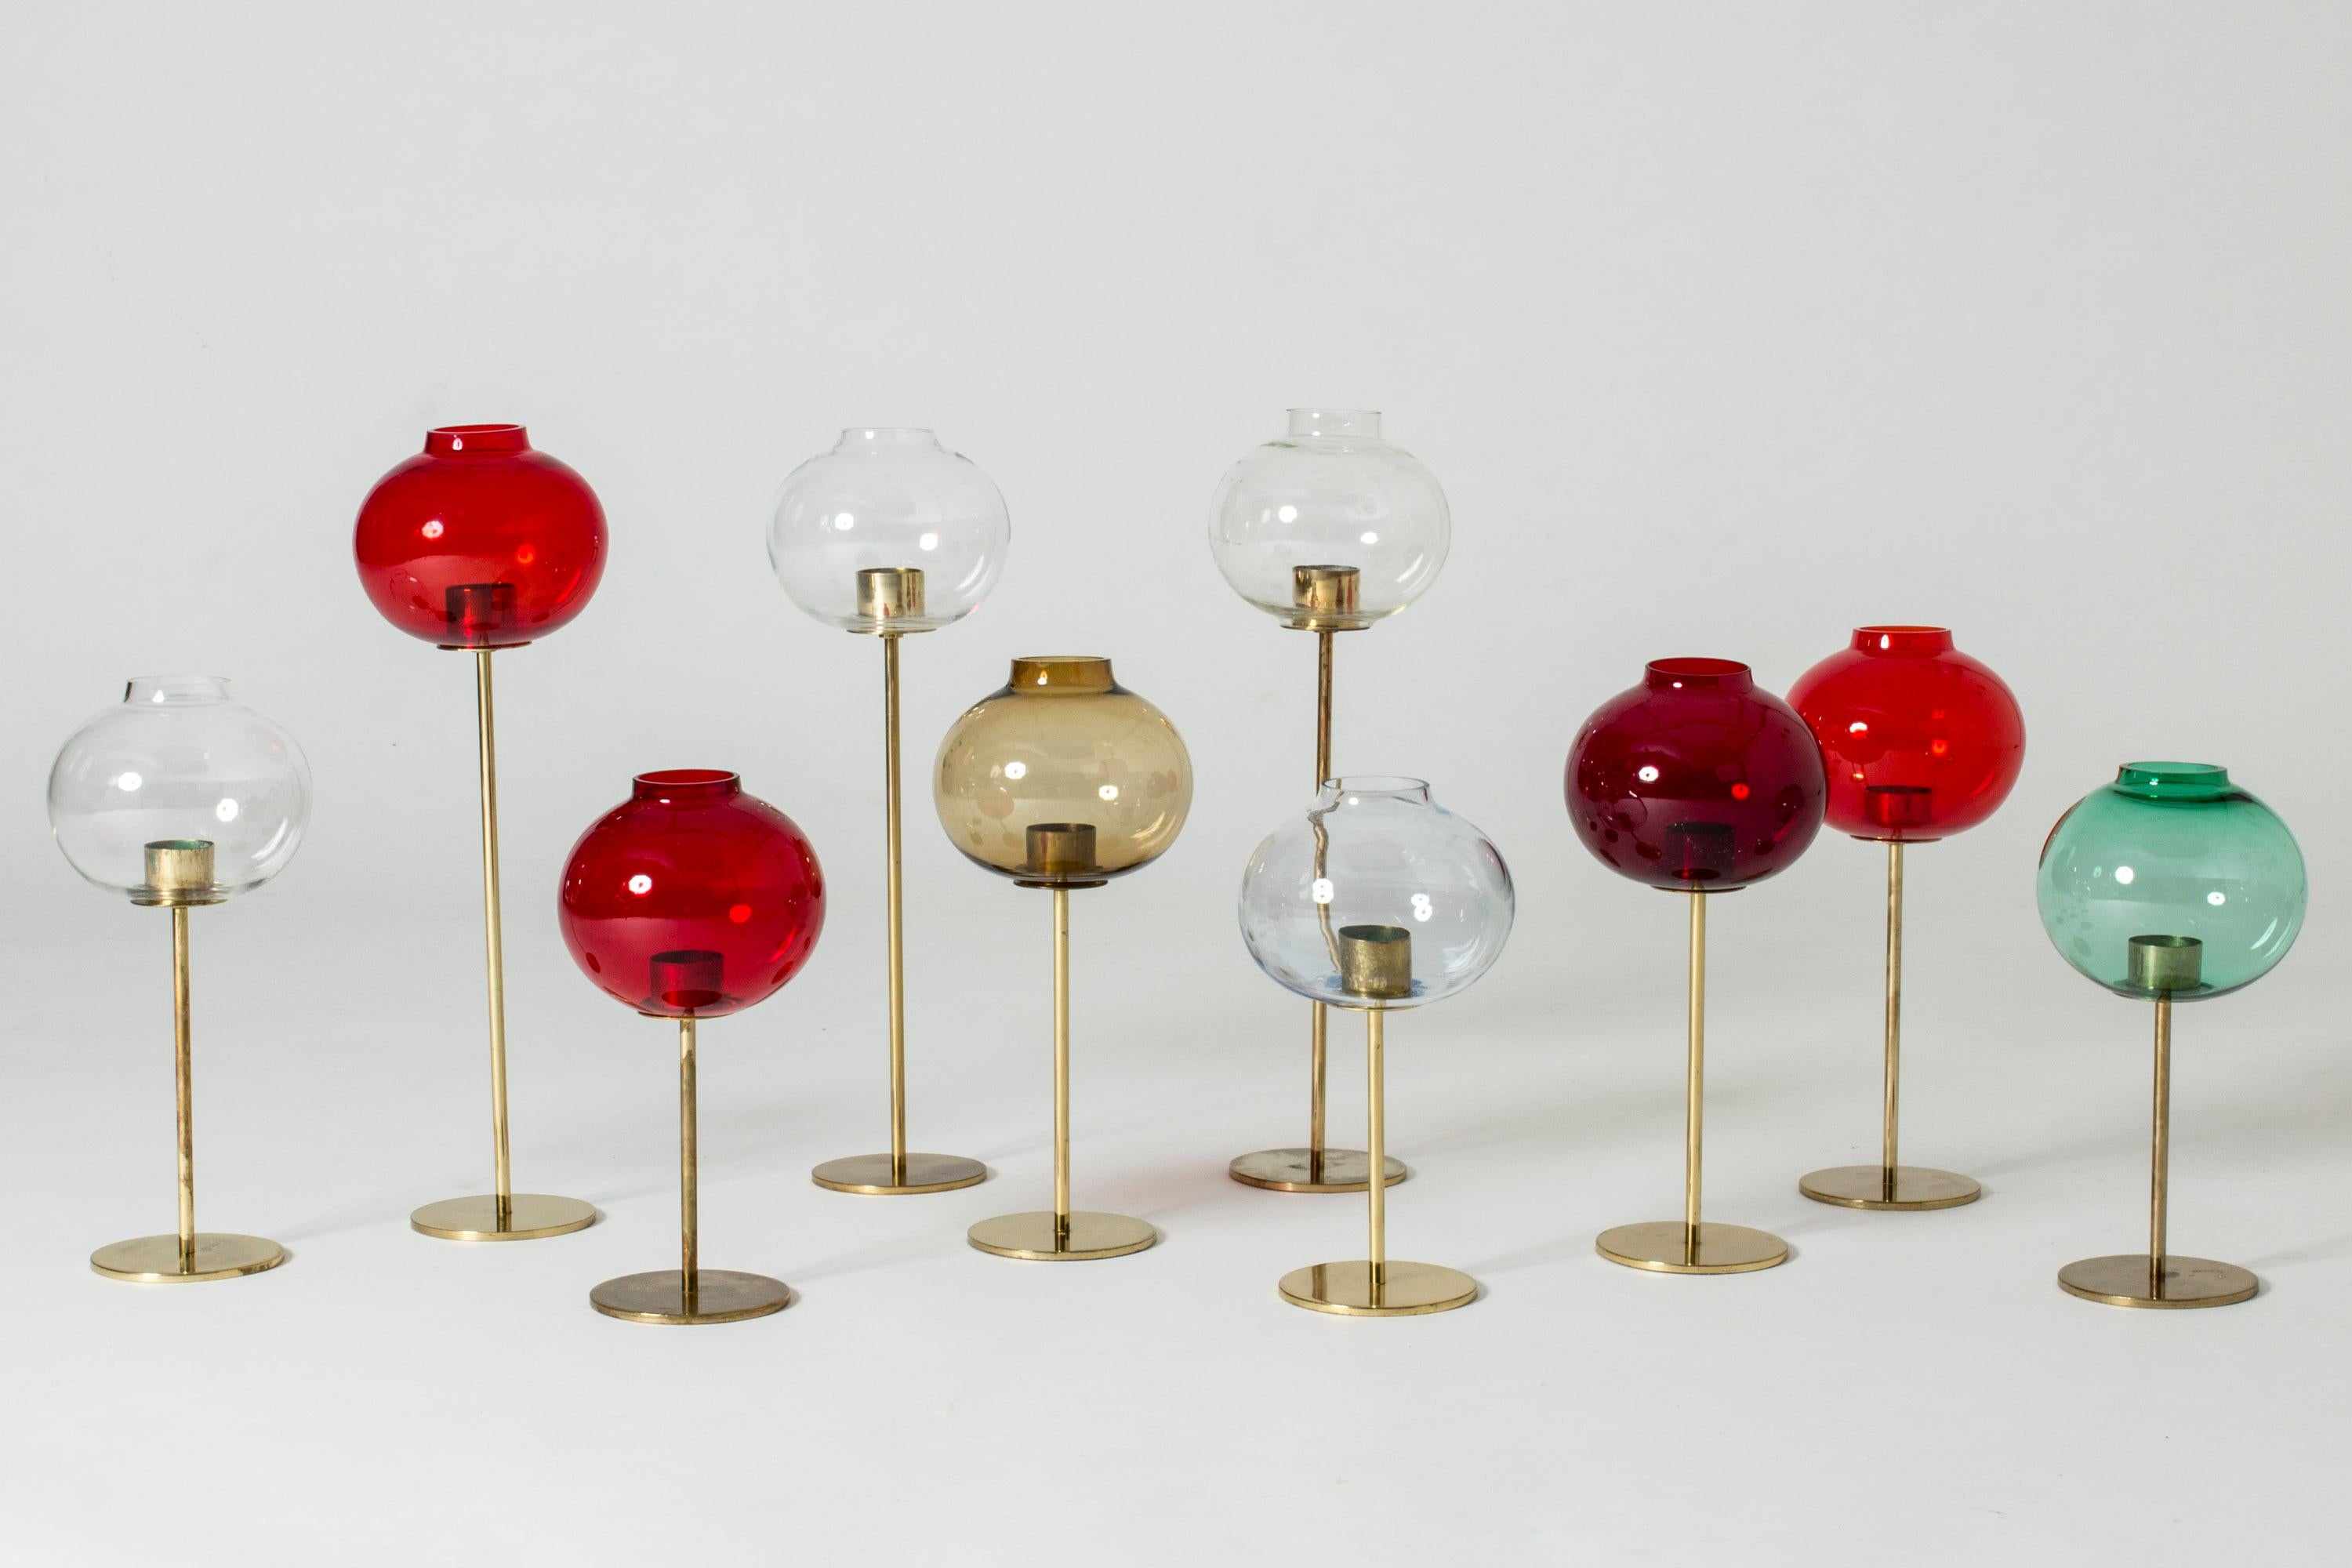 Set of ten brass and glass candleholders by Hans-Agne Jakobsson. Cool play between the slender stems and bulbous glass shades. Red, clear, smoke, pale blue and green colored shades. Fit thick candles.

Size: Height 26-44 cm, diameter 13 cm.